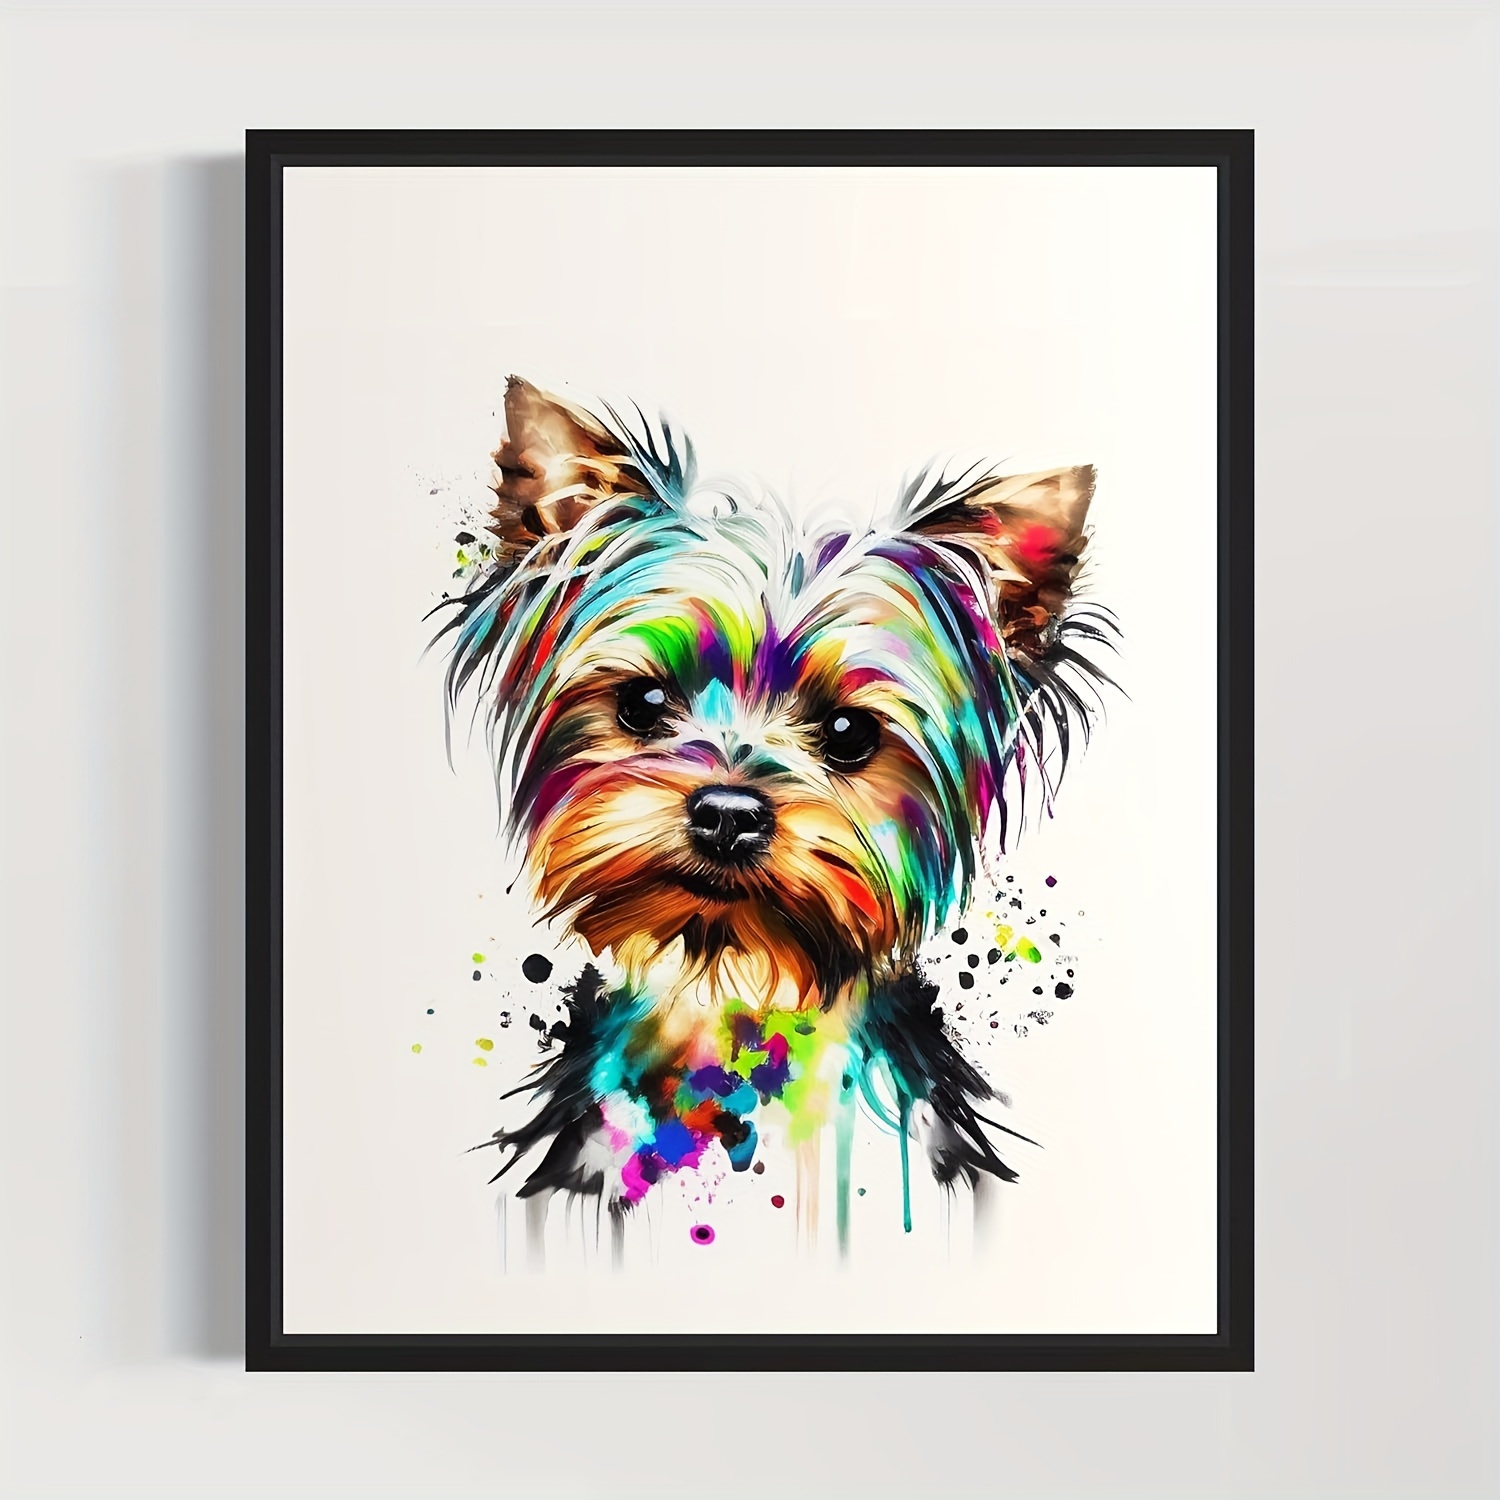 

1pc, Yorkshire Terrier Art Poster Canvas Painting, Wall Art Decoration, Popular Dog Artist Home Artwork For Bedroom, Living Room, Bathroom Decoration, Colorful Dog Photo 12x16 Inches Frameless